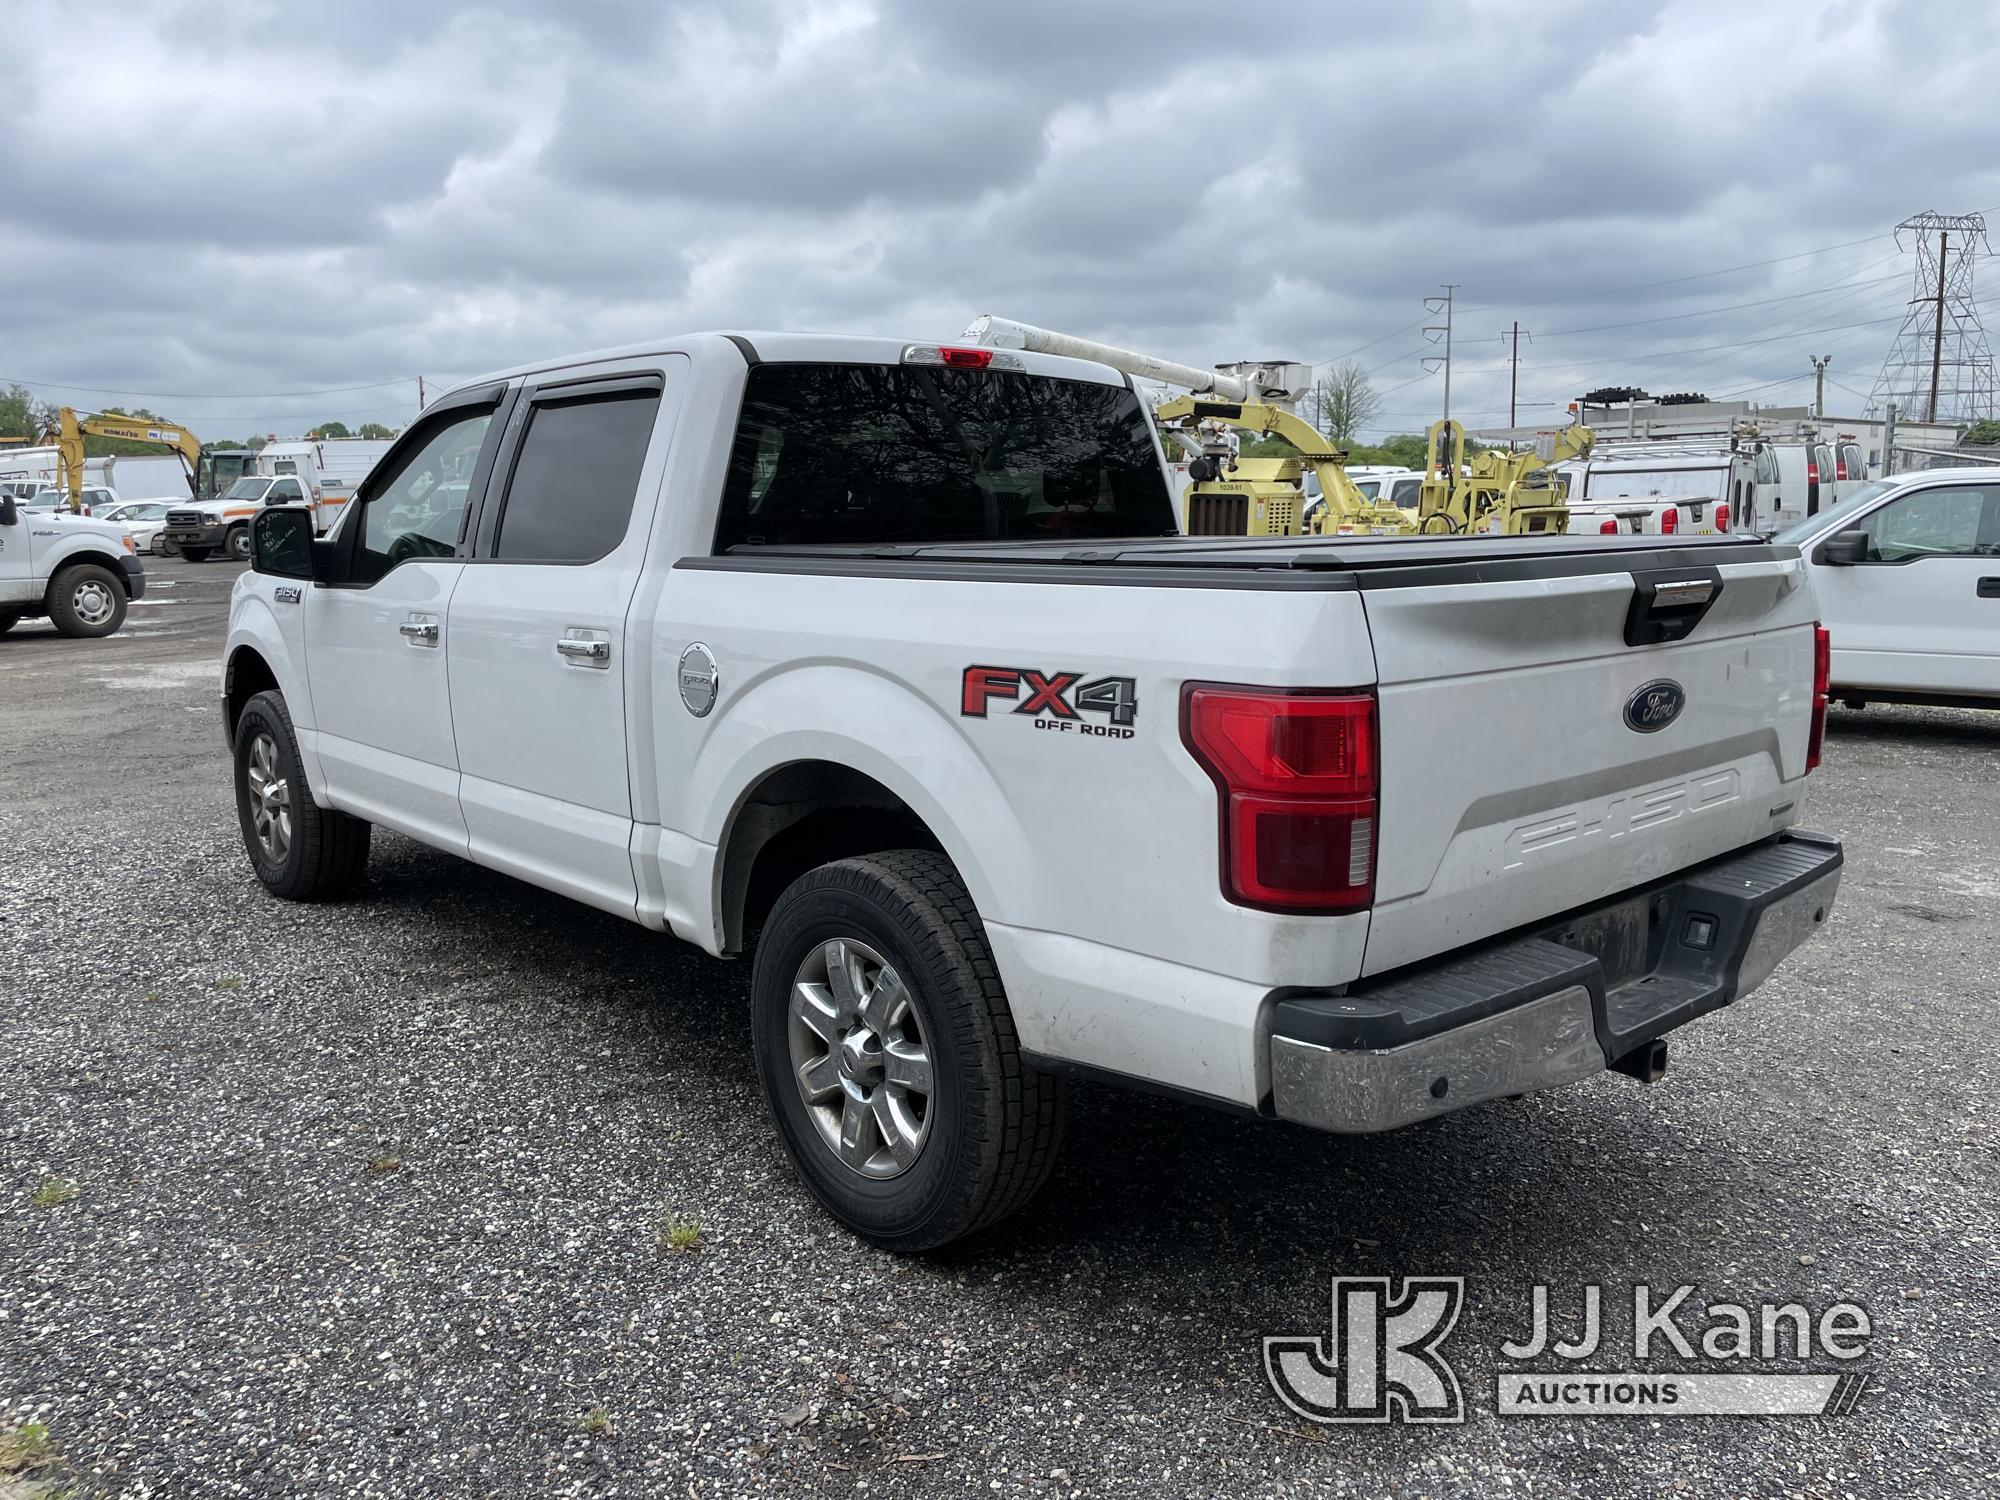 (Plymouth Meeting, PA) 2018 Ford F150 4x4 Crew-Cab Pickup Truck Bad Engine,Runs & Moves, Abs Light O